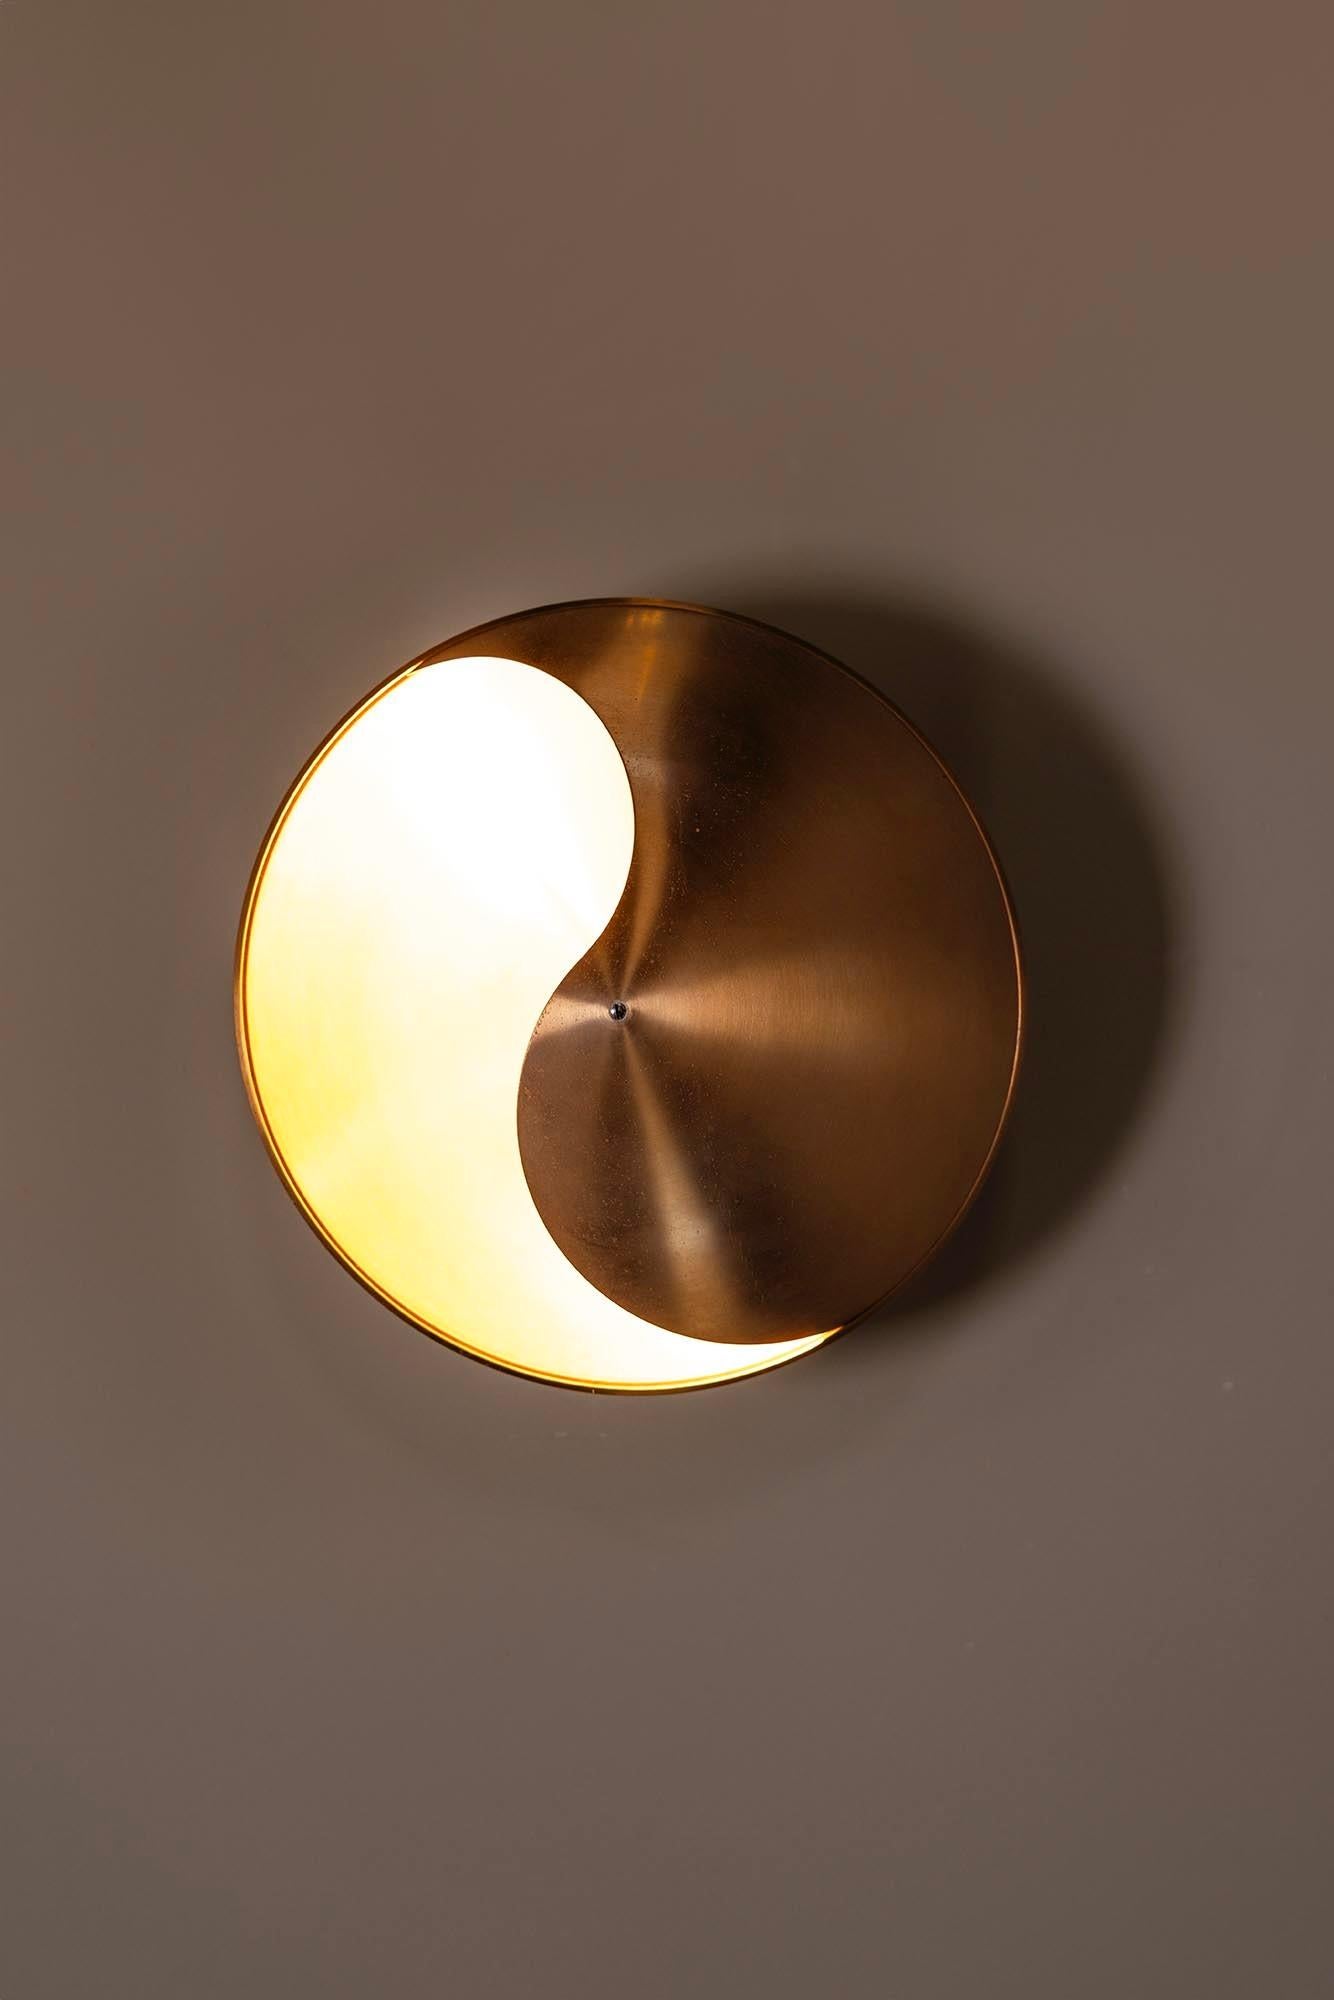 Aluminum Five “YinYang” Wall Lamps by H. Sneyders de Vogel for Raak, The Netherlands For Sale